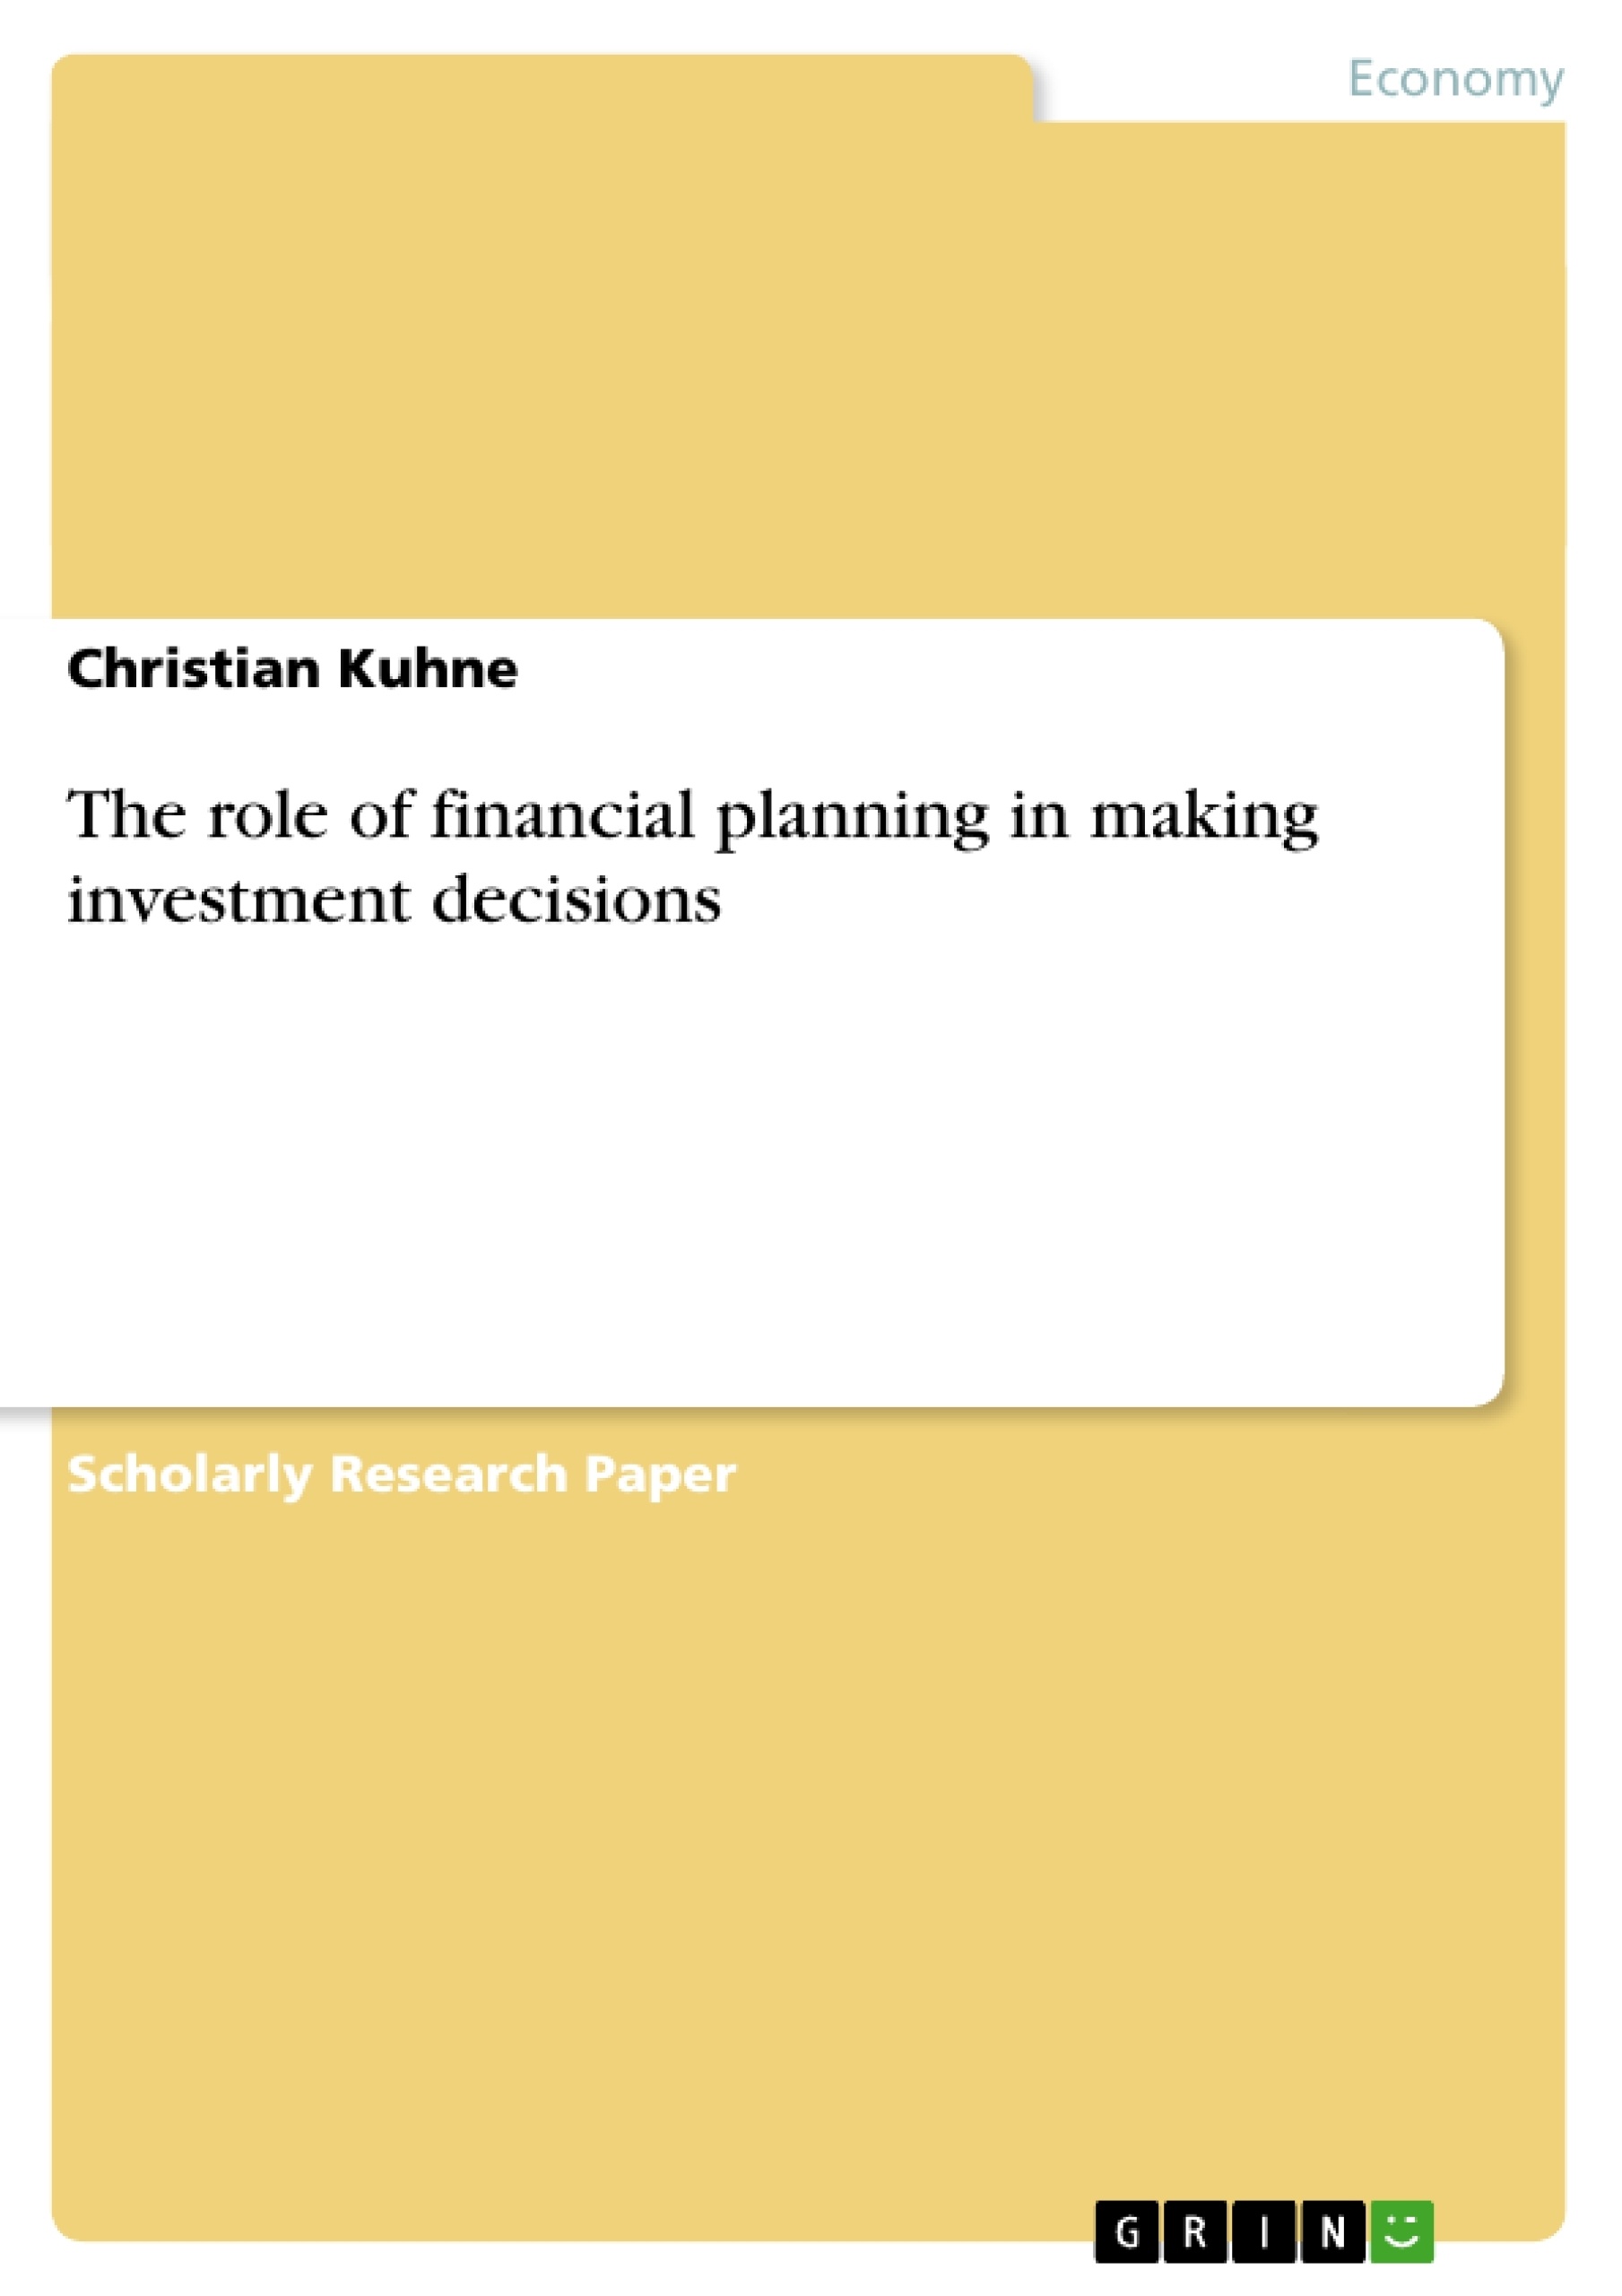 Título: The role of financial planning in making investment decisions